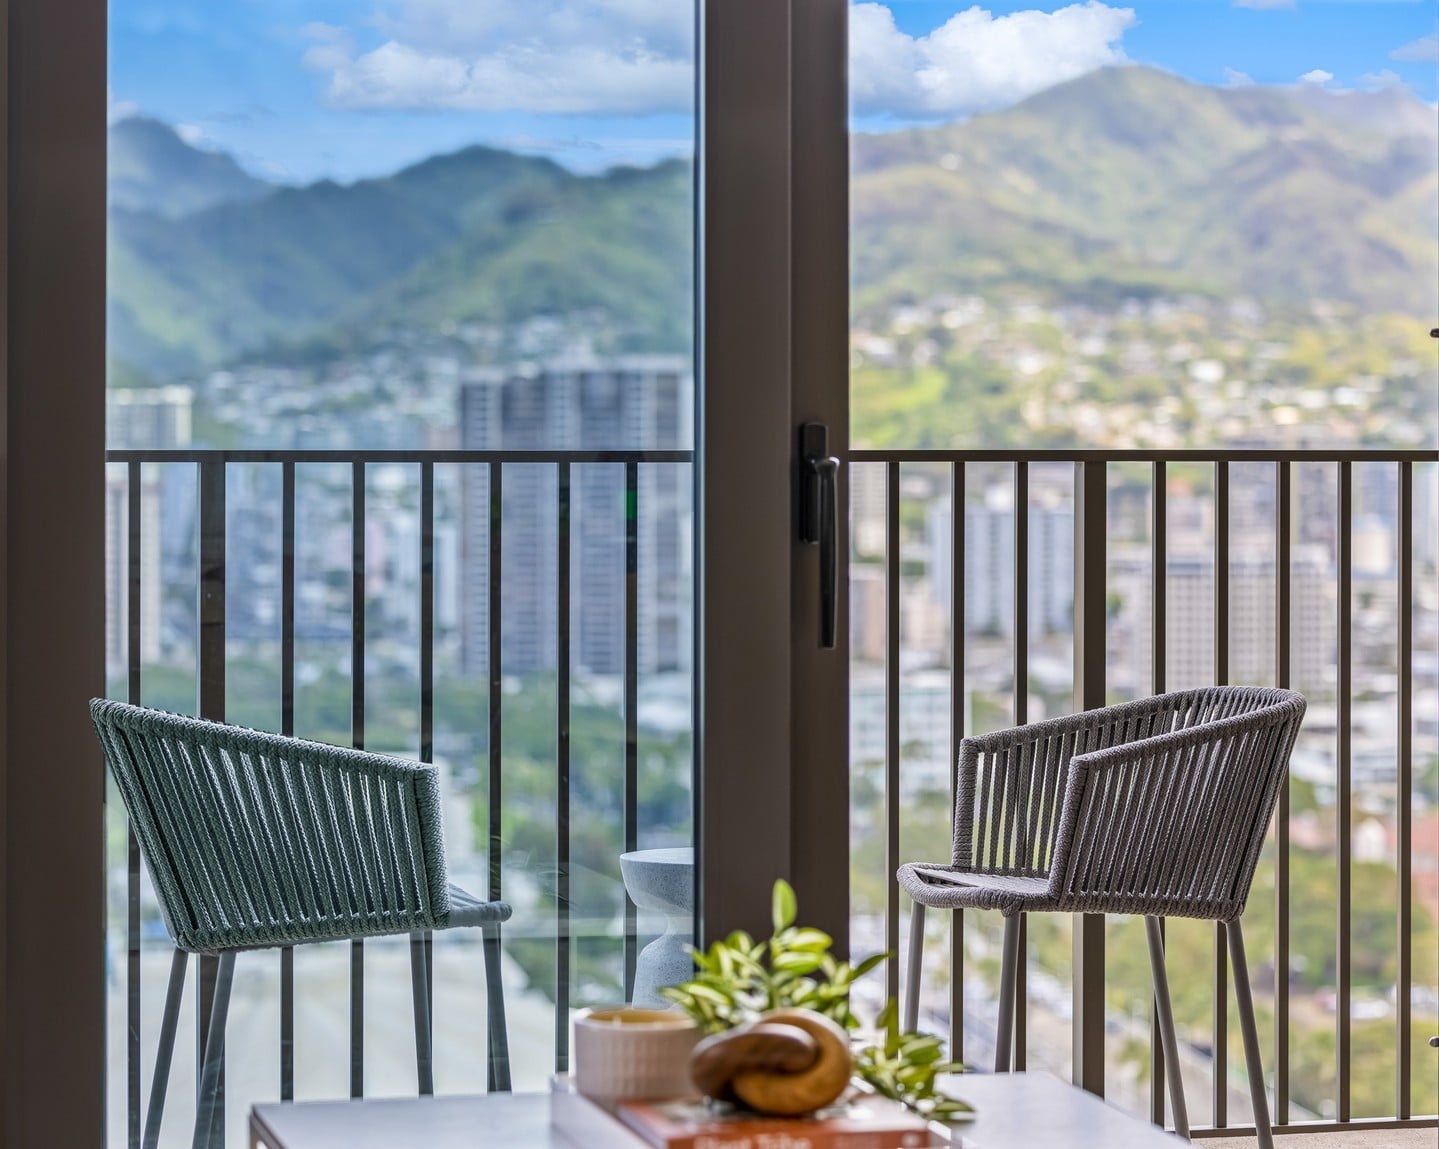 At ʻAʻaliʻi, take in sweeping ocean and mountain views and the beauty of the island from your home. Visit the link in our bio to learn more about these move-in ready residences.